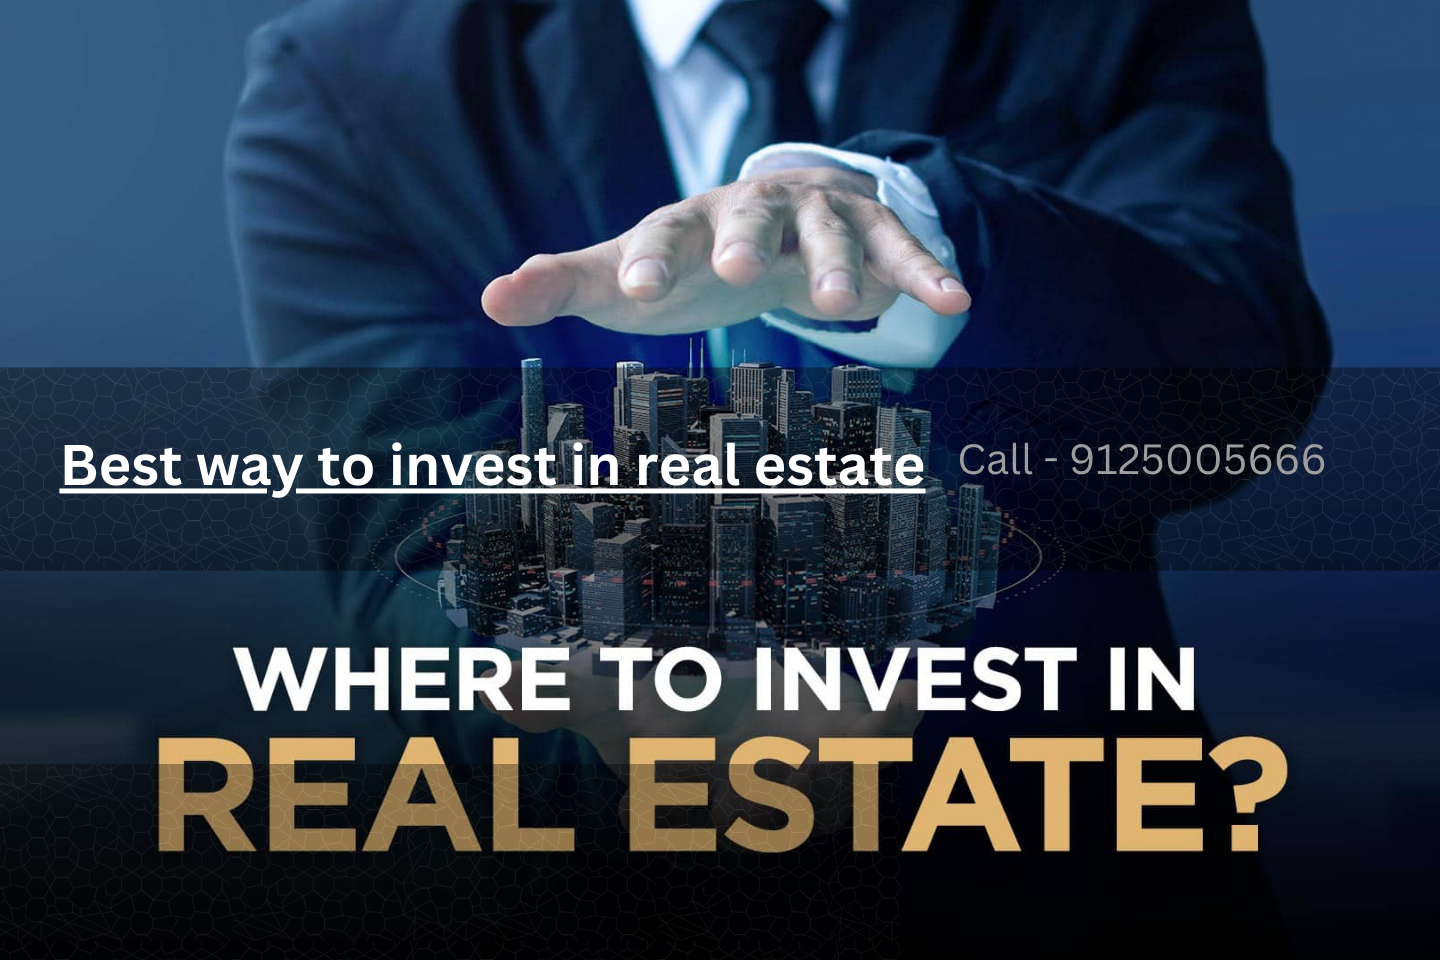 Best way to invest in real estate